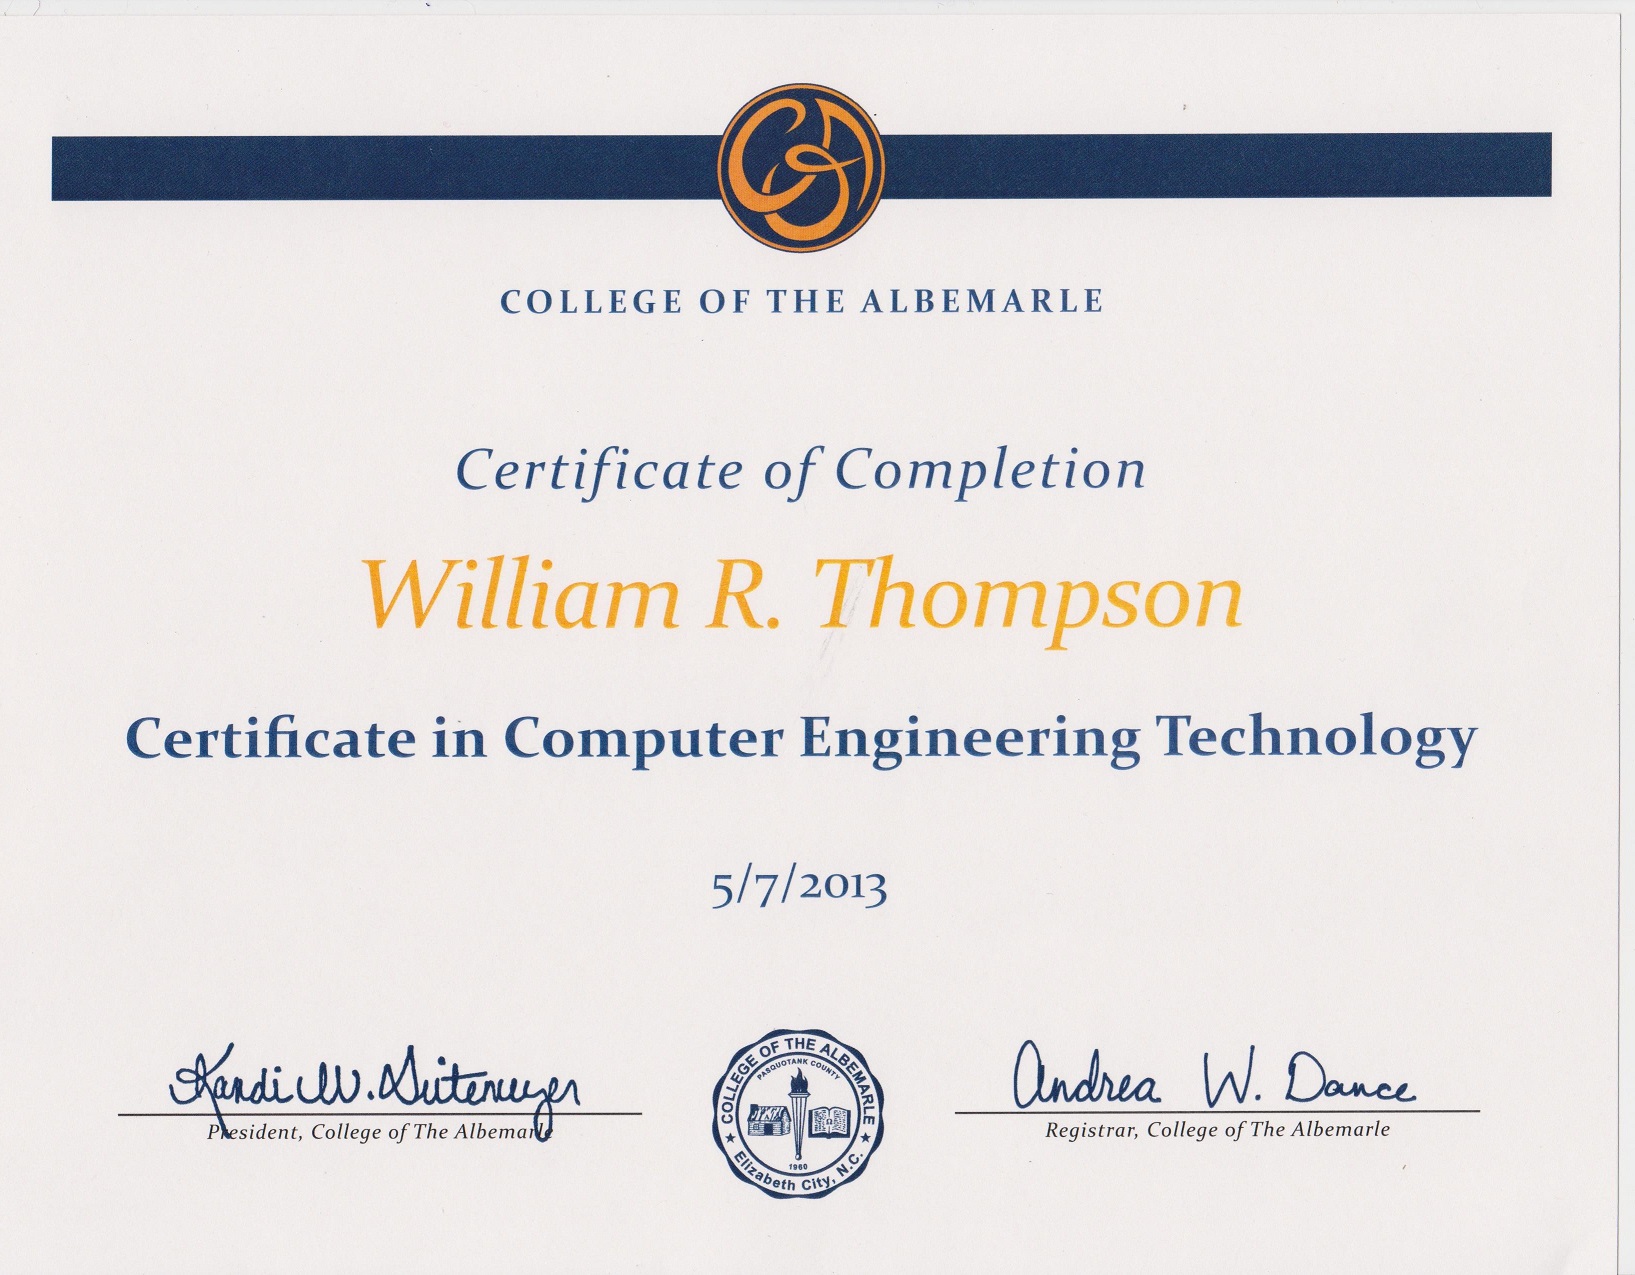 Certification in Computer Engineering Technology